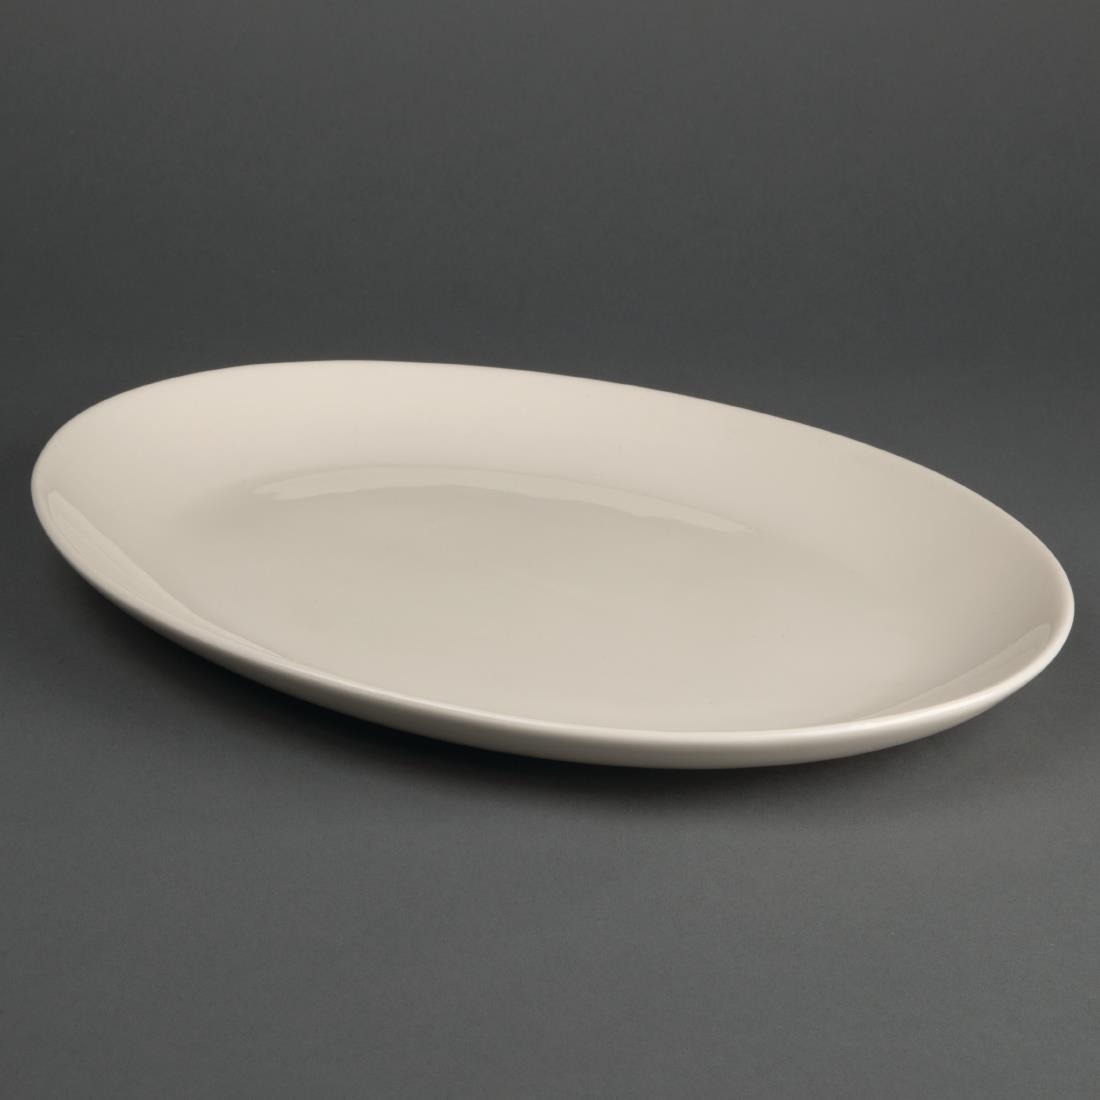 Olympia Ivory Oval Coupe Plates 330mm (Pack of 6) - U128  - 3